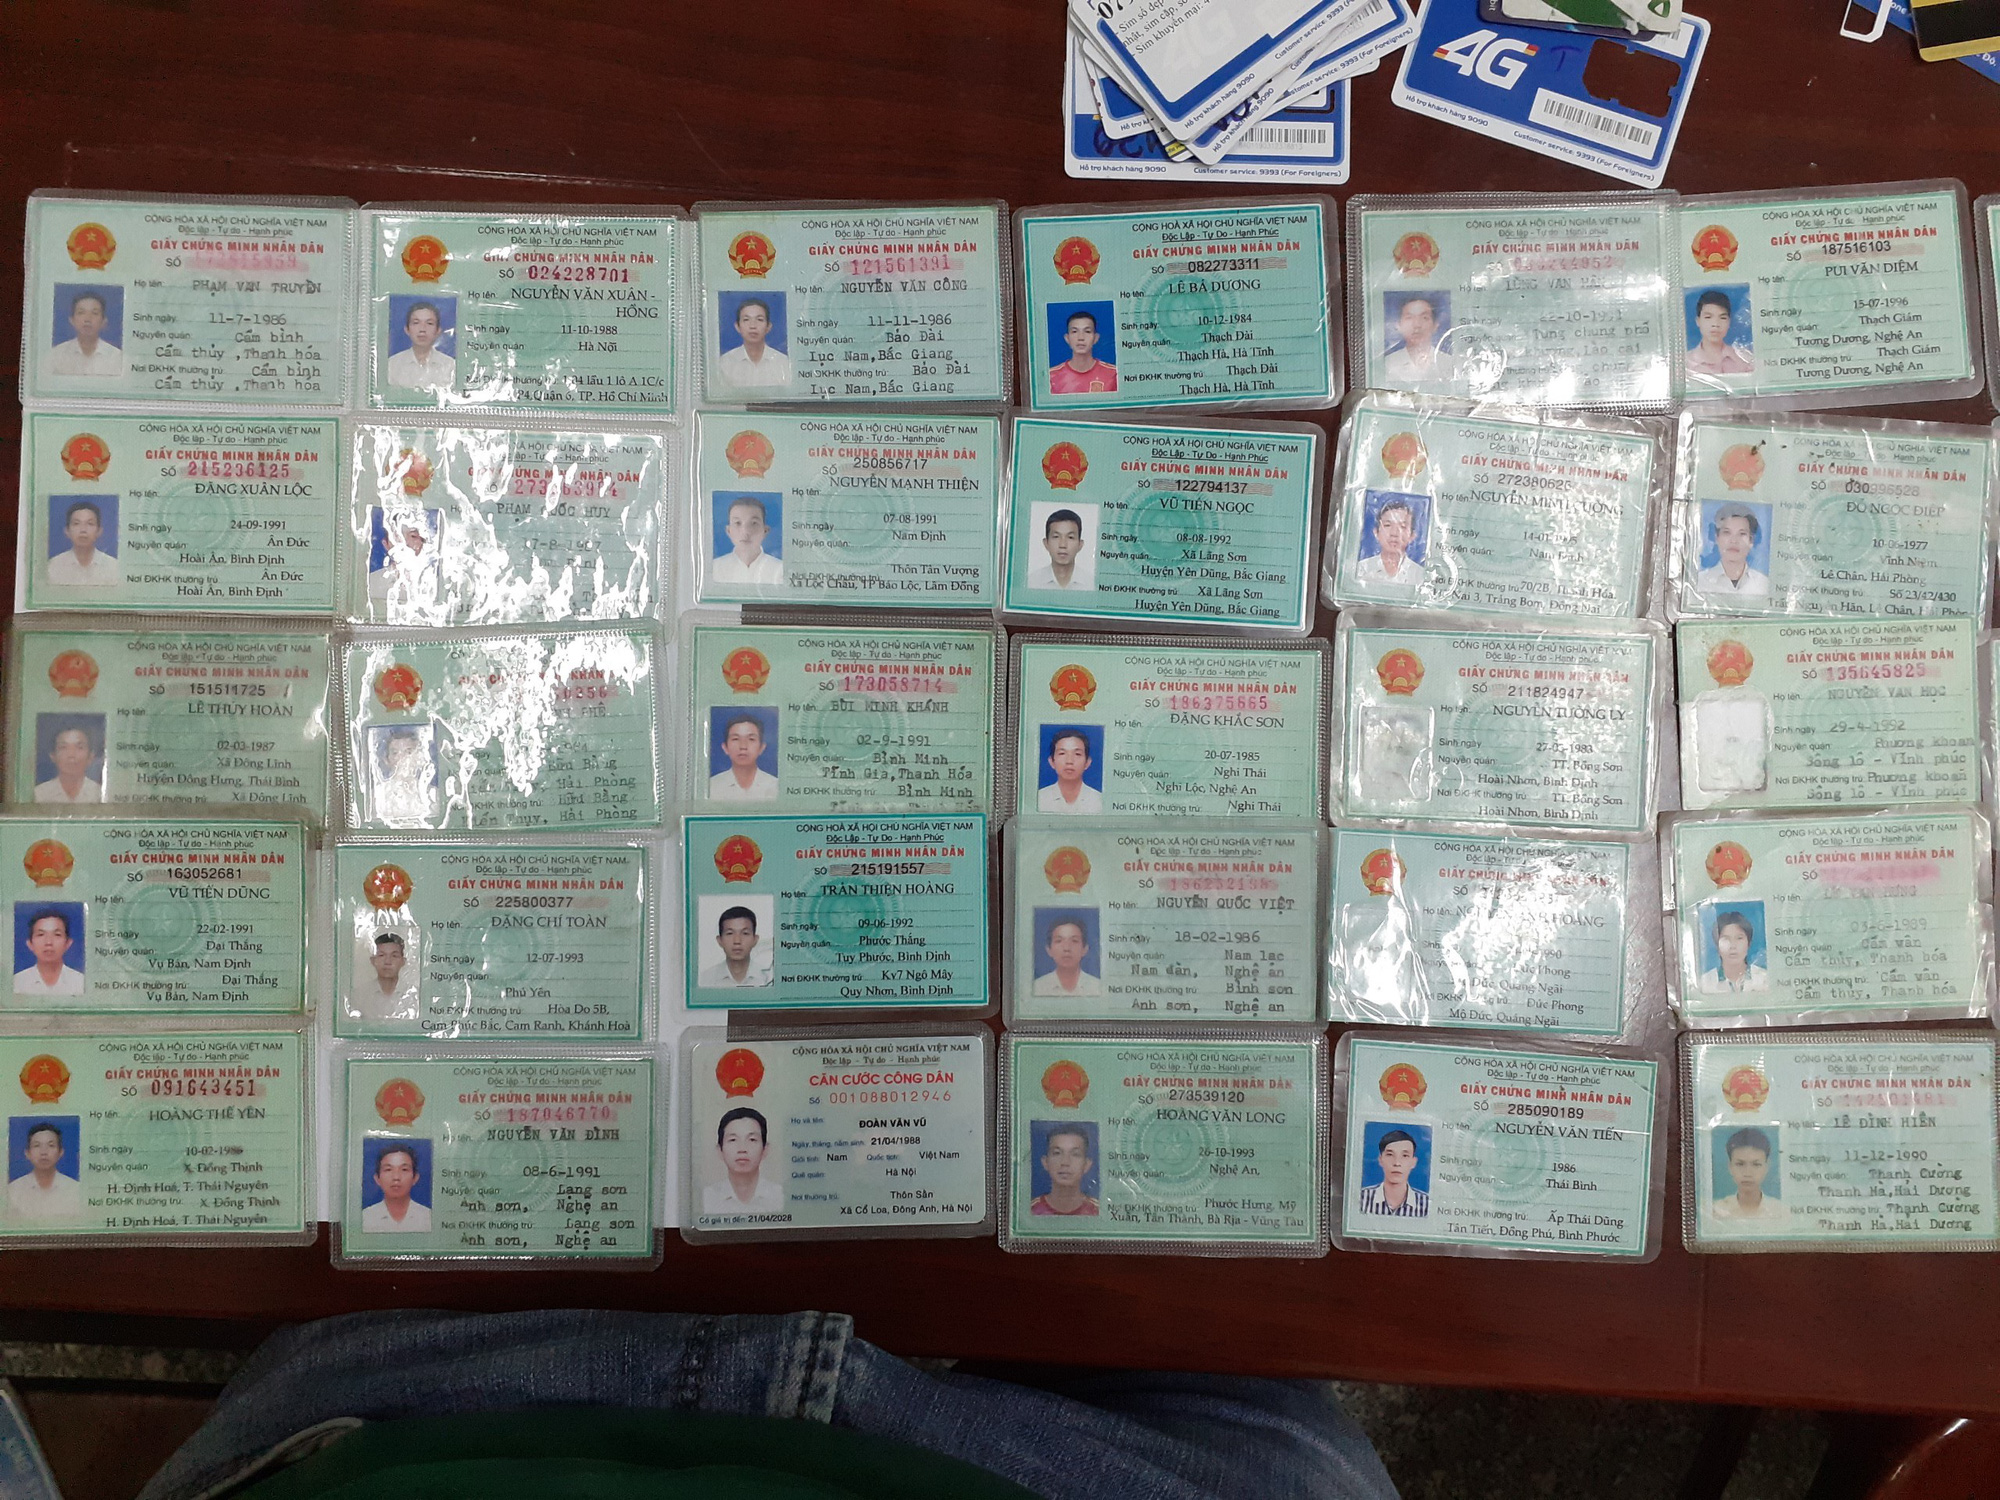 Forged IDs, once used by the fraud ring to set up bank accounts, are seen in this photo. Photo: Thuong Hien / Tuoi Tre